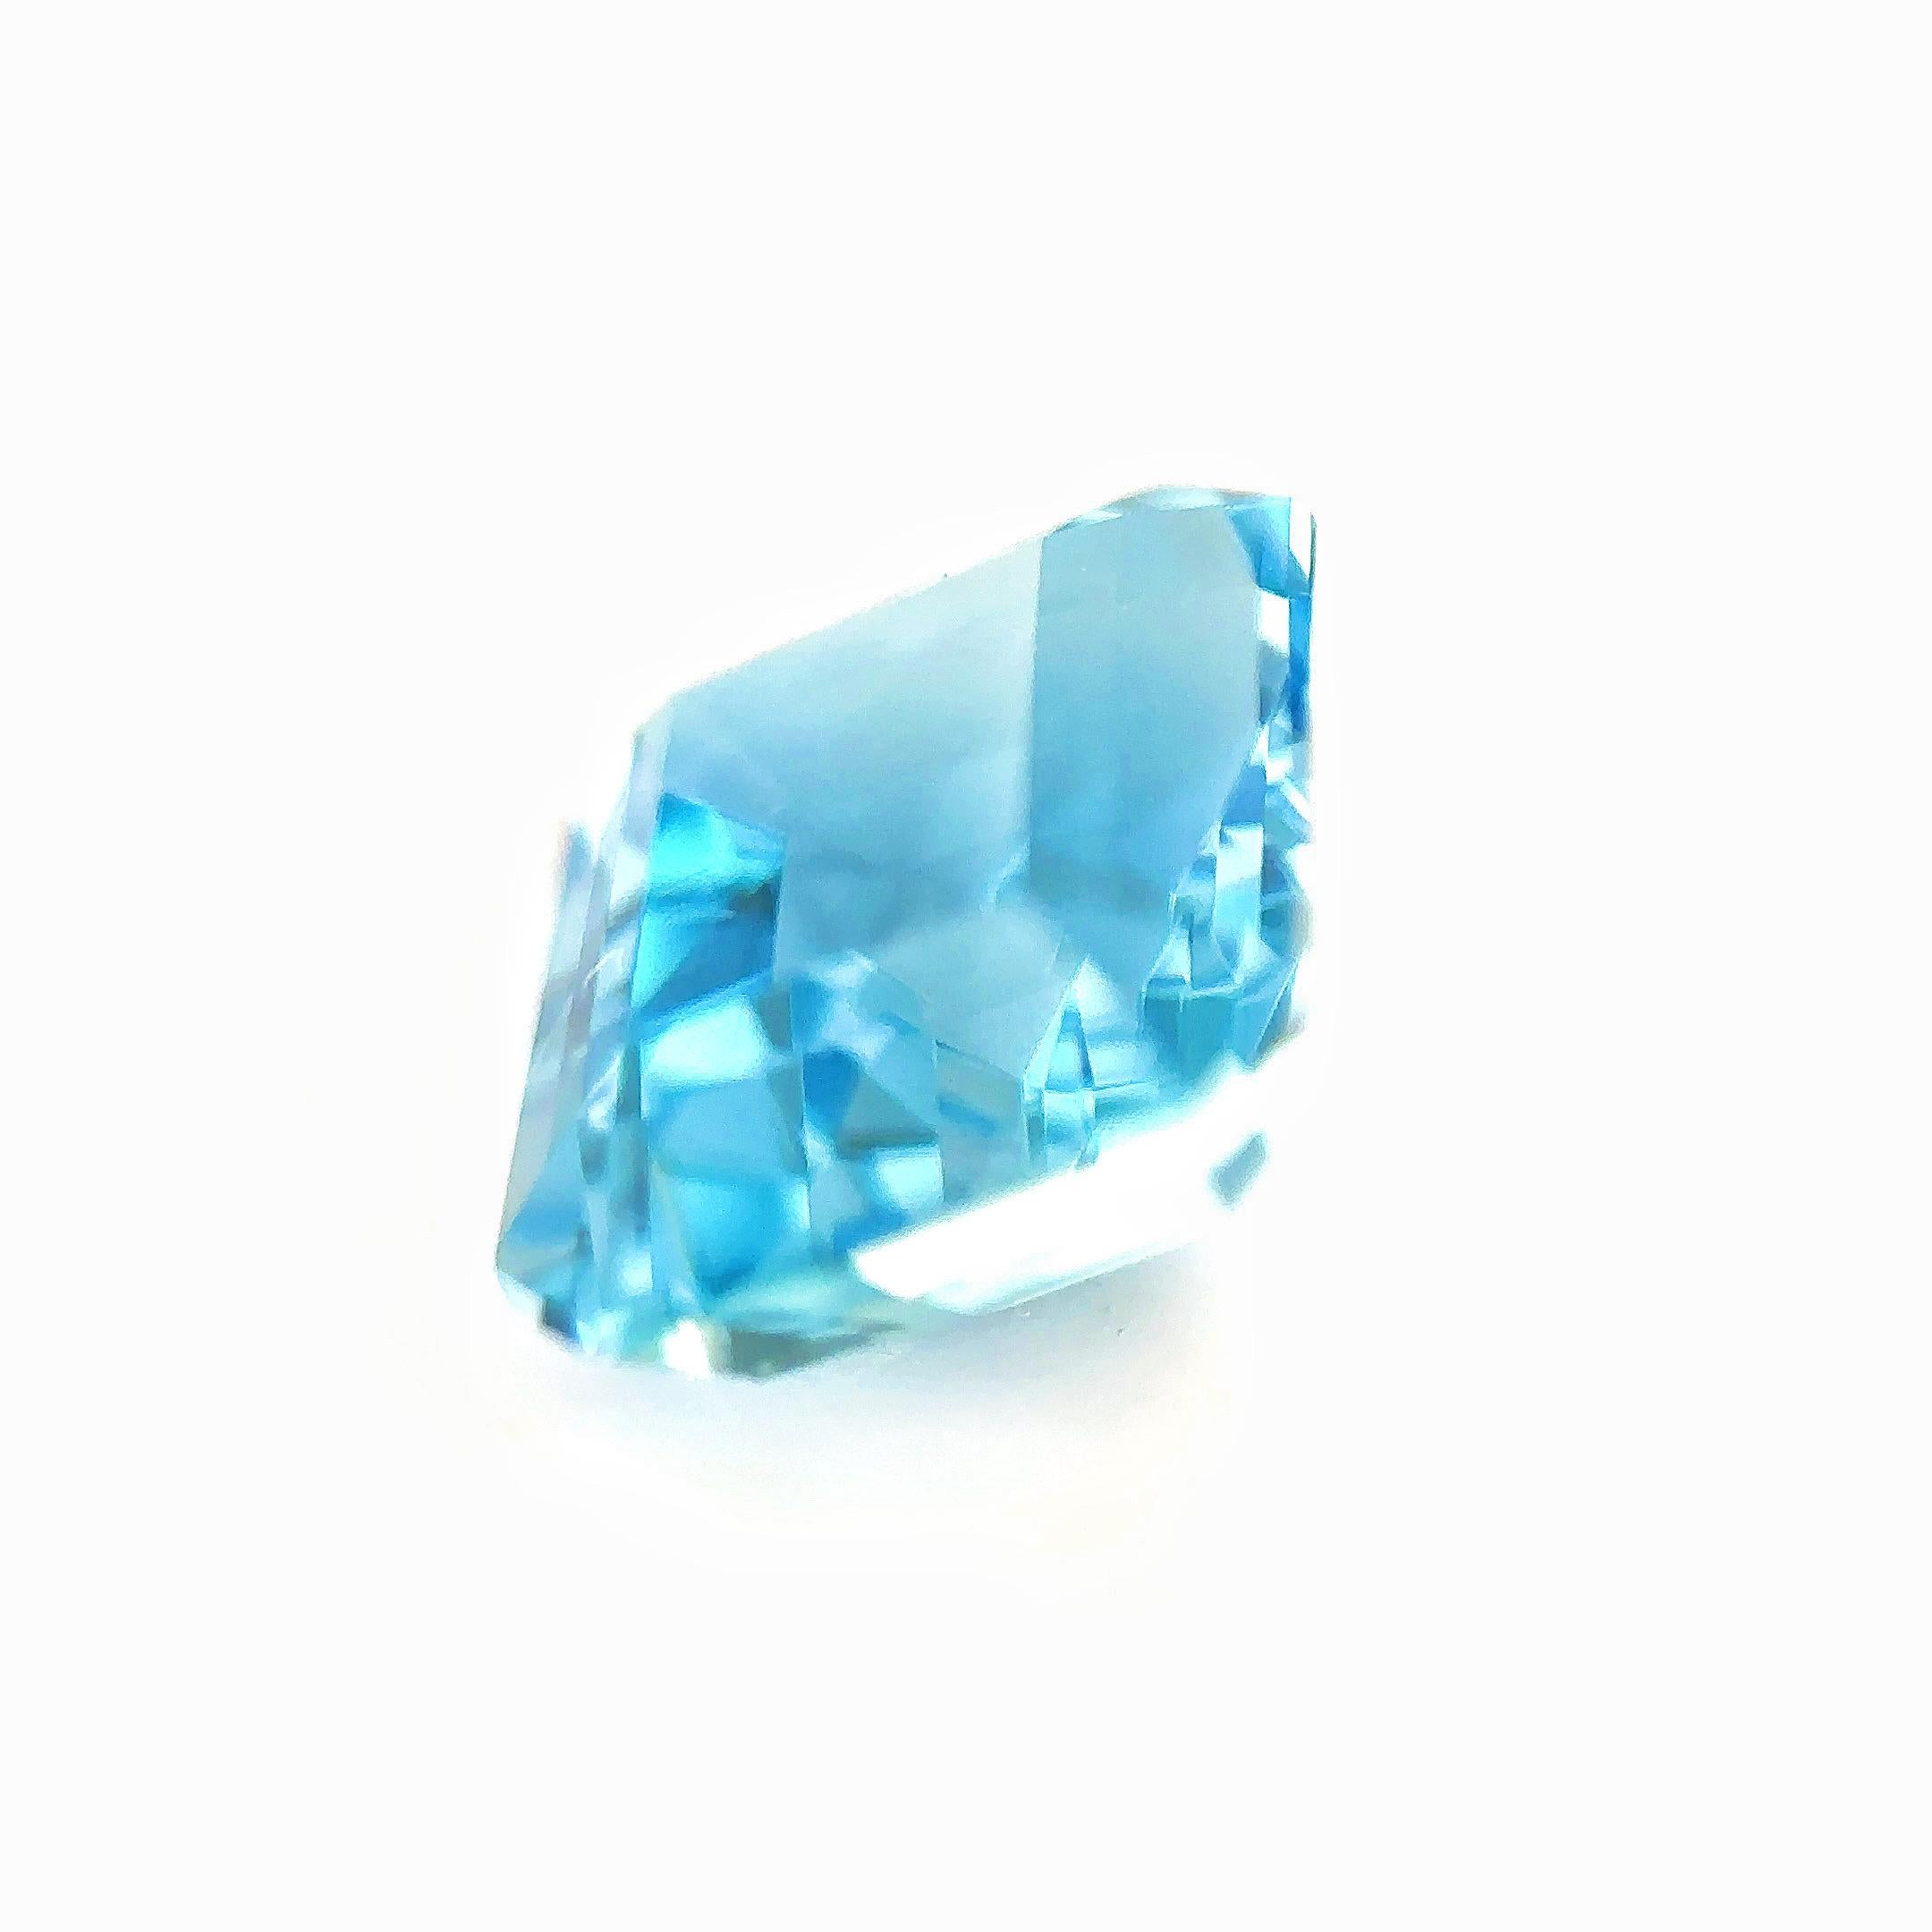 1.99 Carat Natural Santa Maria Color Aquamarine Loose Stone

Appointed lab certificate can be arranged upon request

This Item is ideal for your design as an engagement ring, cocktail ring, necklace, bracelet, etc.


ABOUT US

Xuelai Jewellery